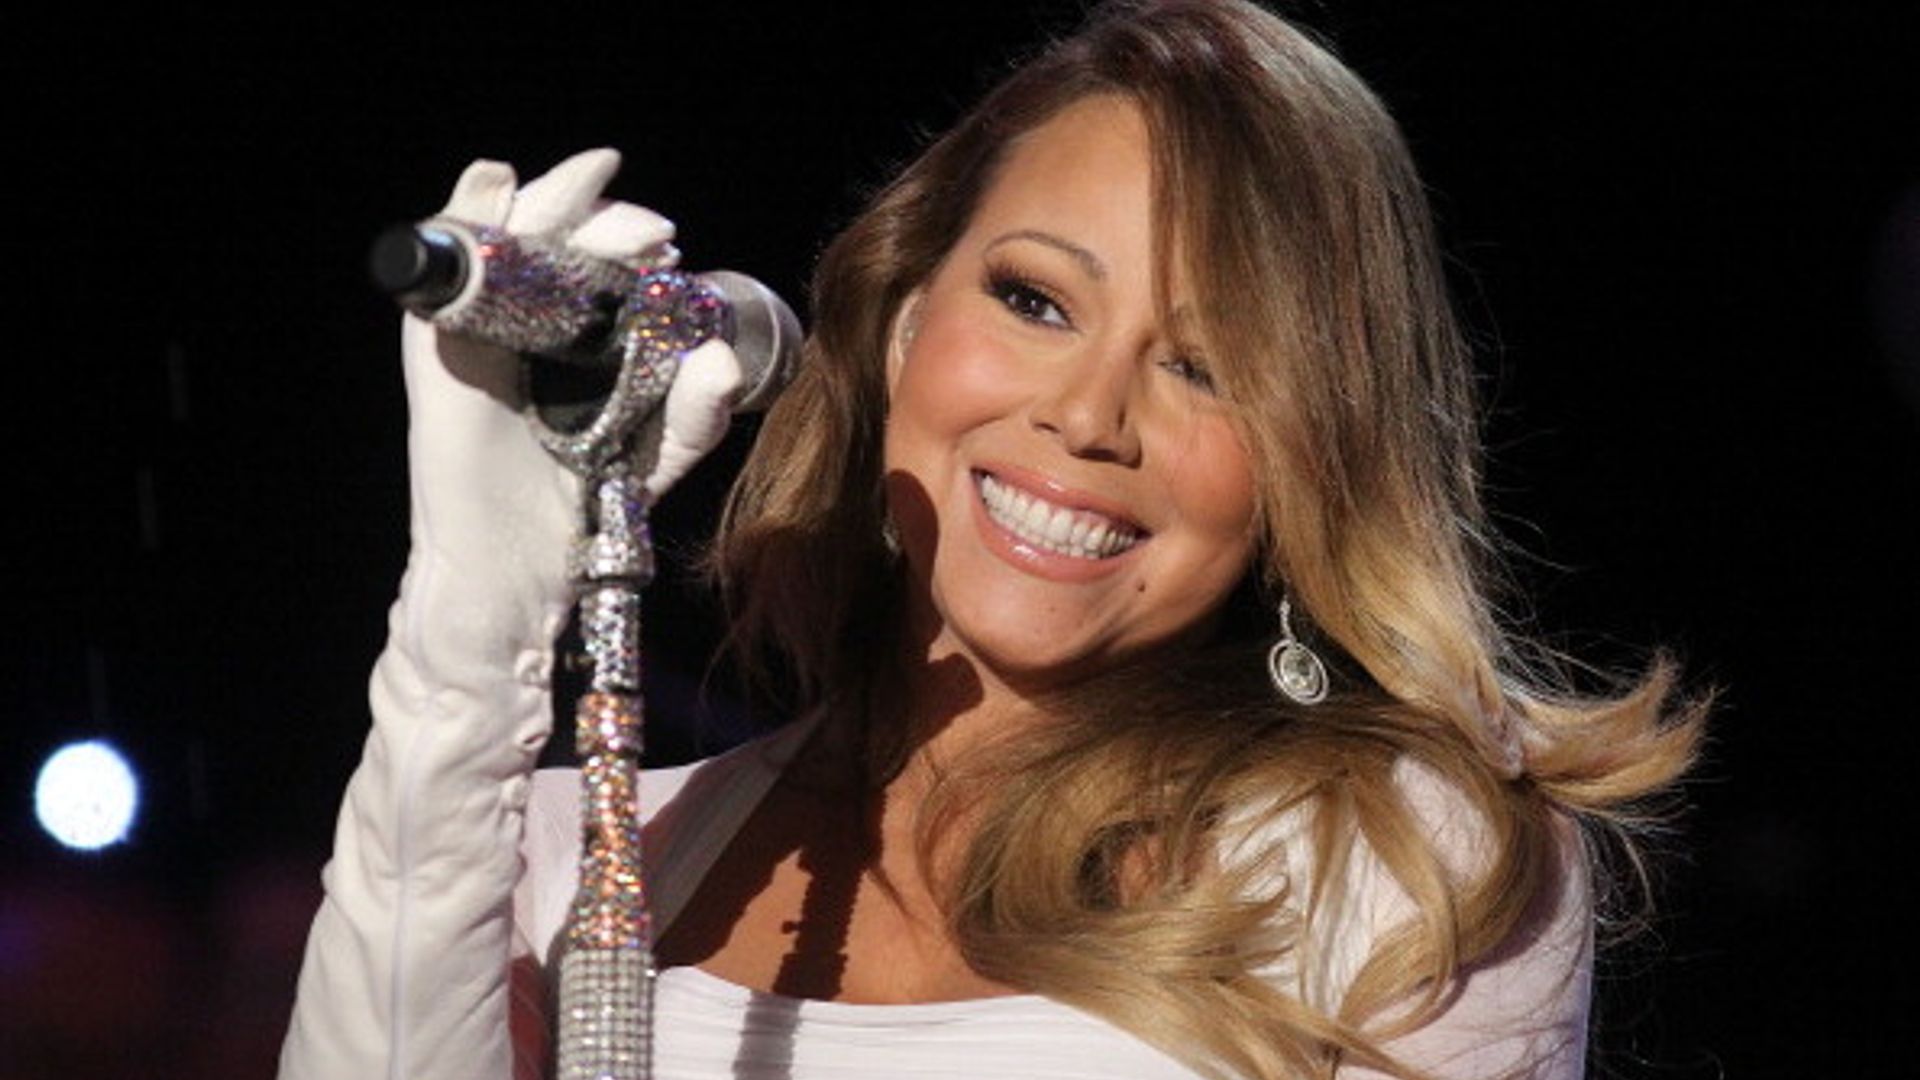 Mariah Carey's 35-carat engagement ring designer wanted to create 'iconic ring' for an 'iconic' diva